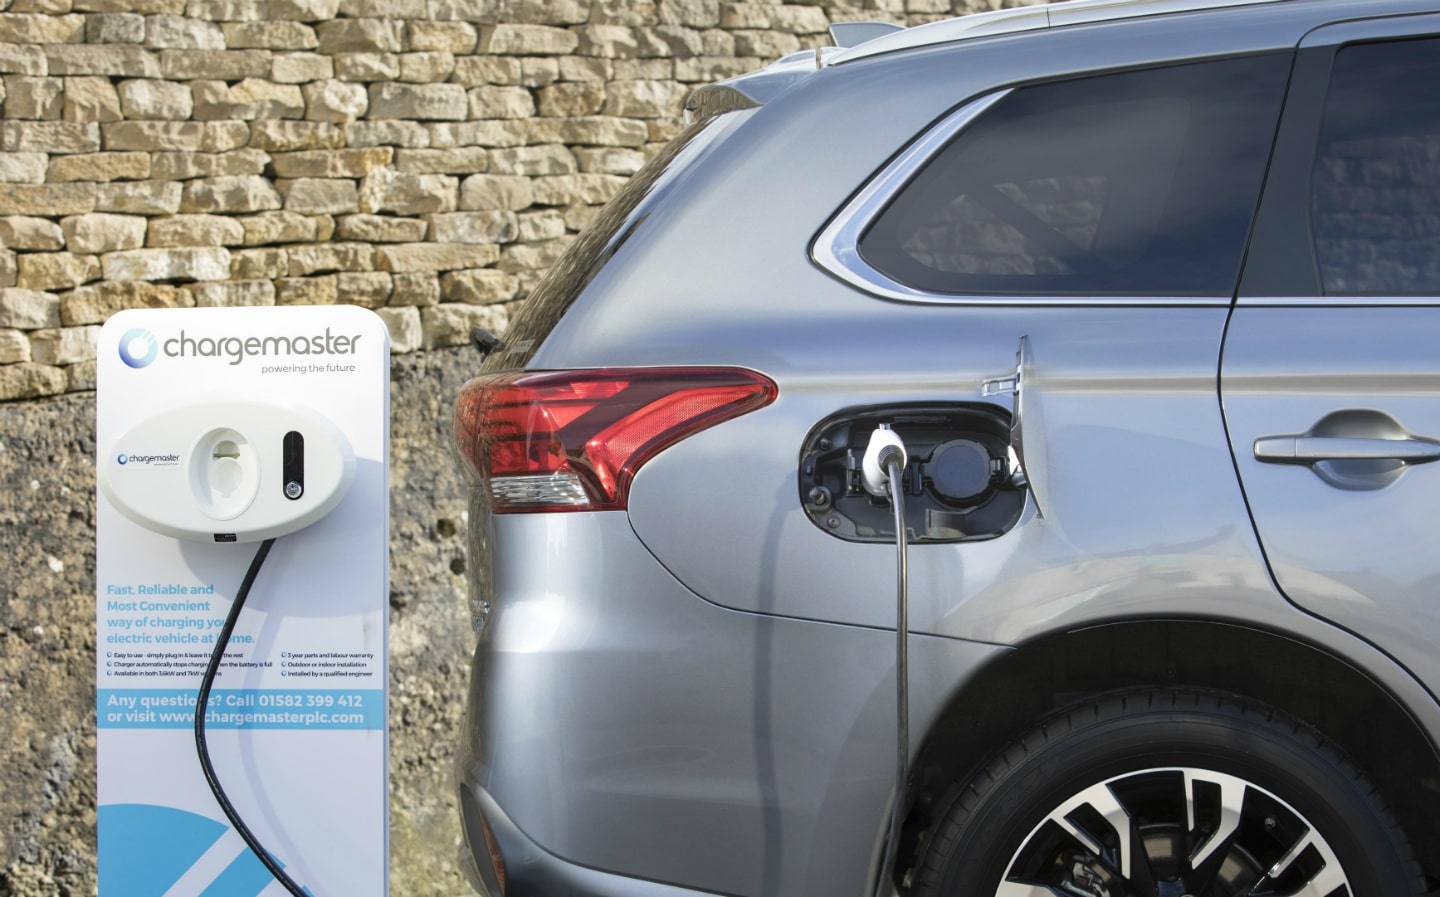 Plug-in Hybrid: Between Charm and Disappointment